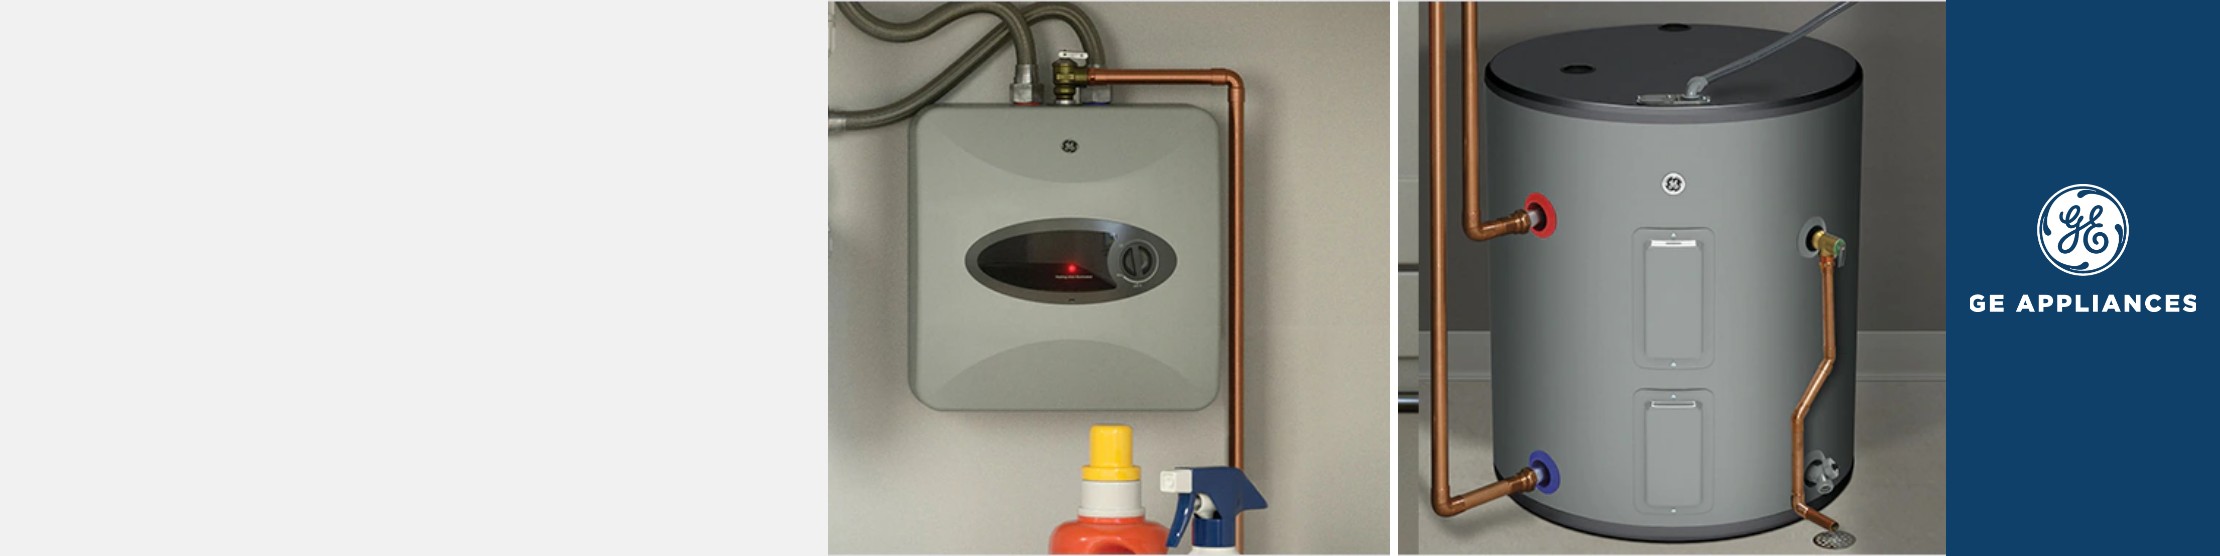 Up to 50% select GE Water Heaters